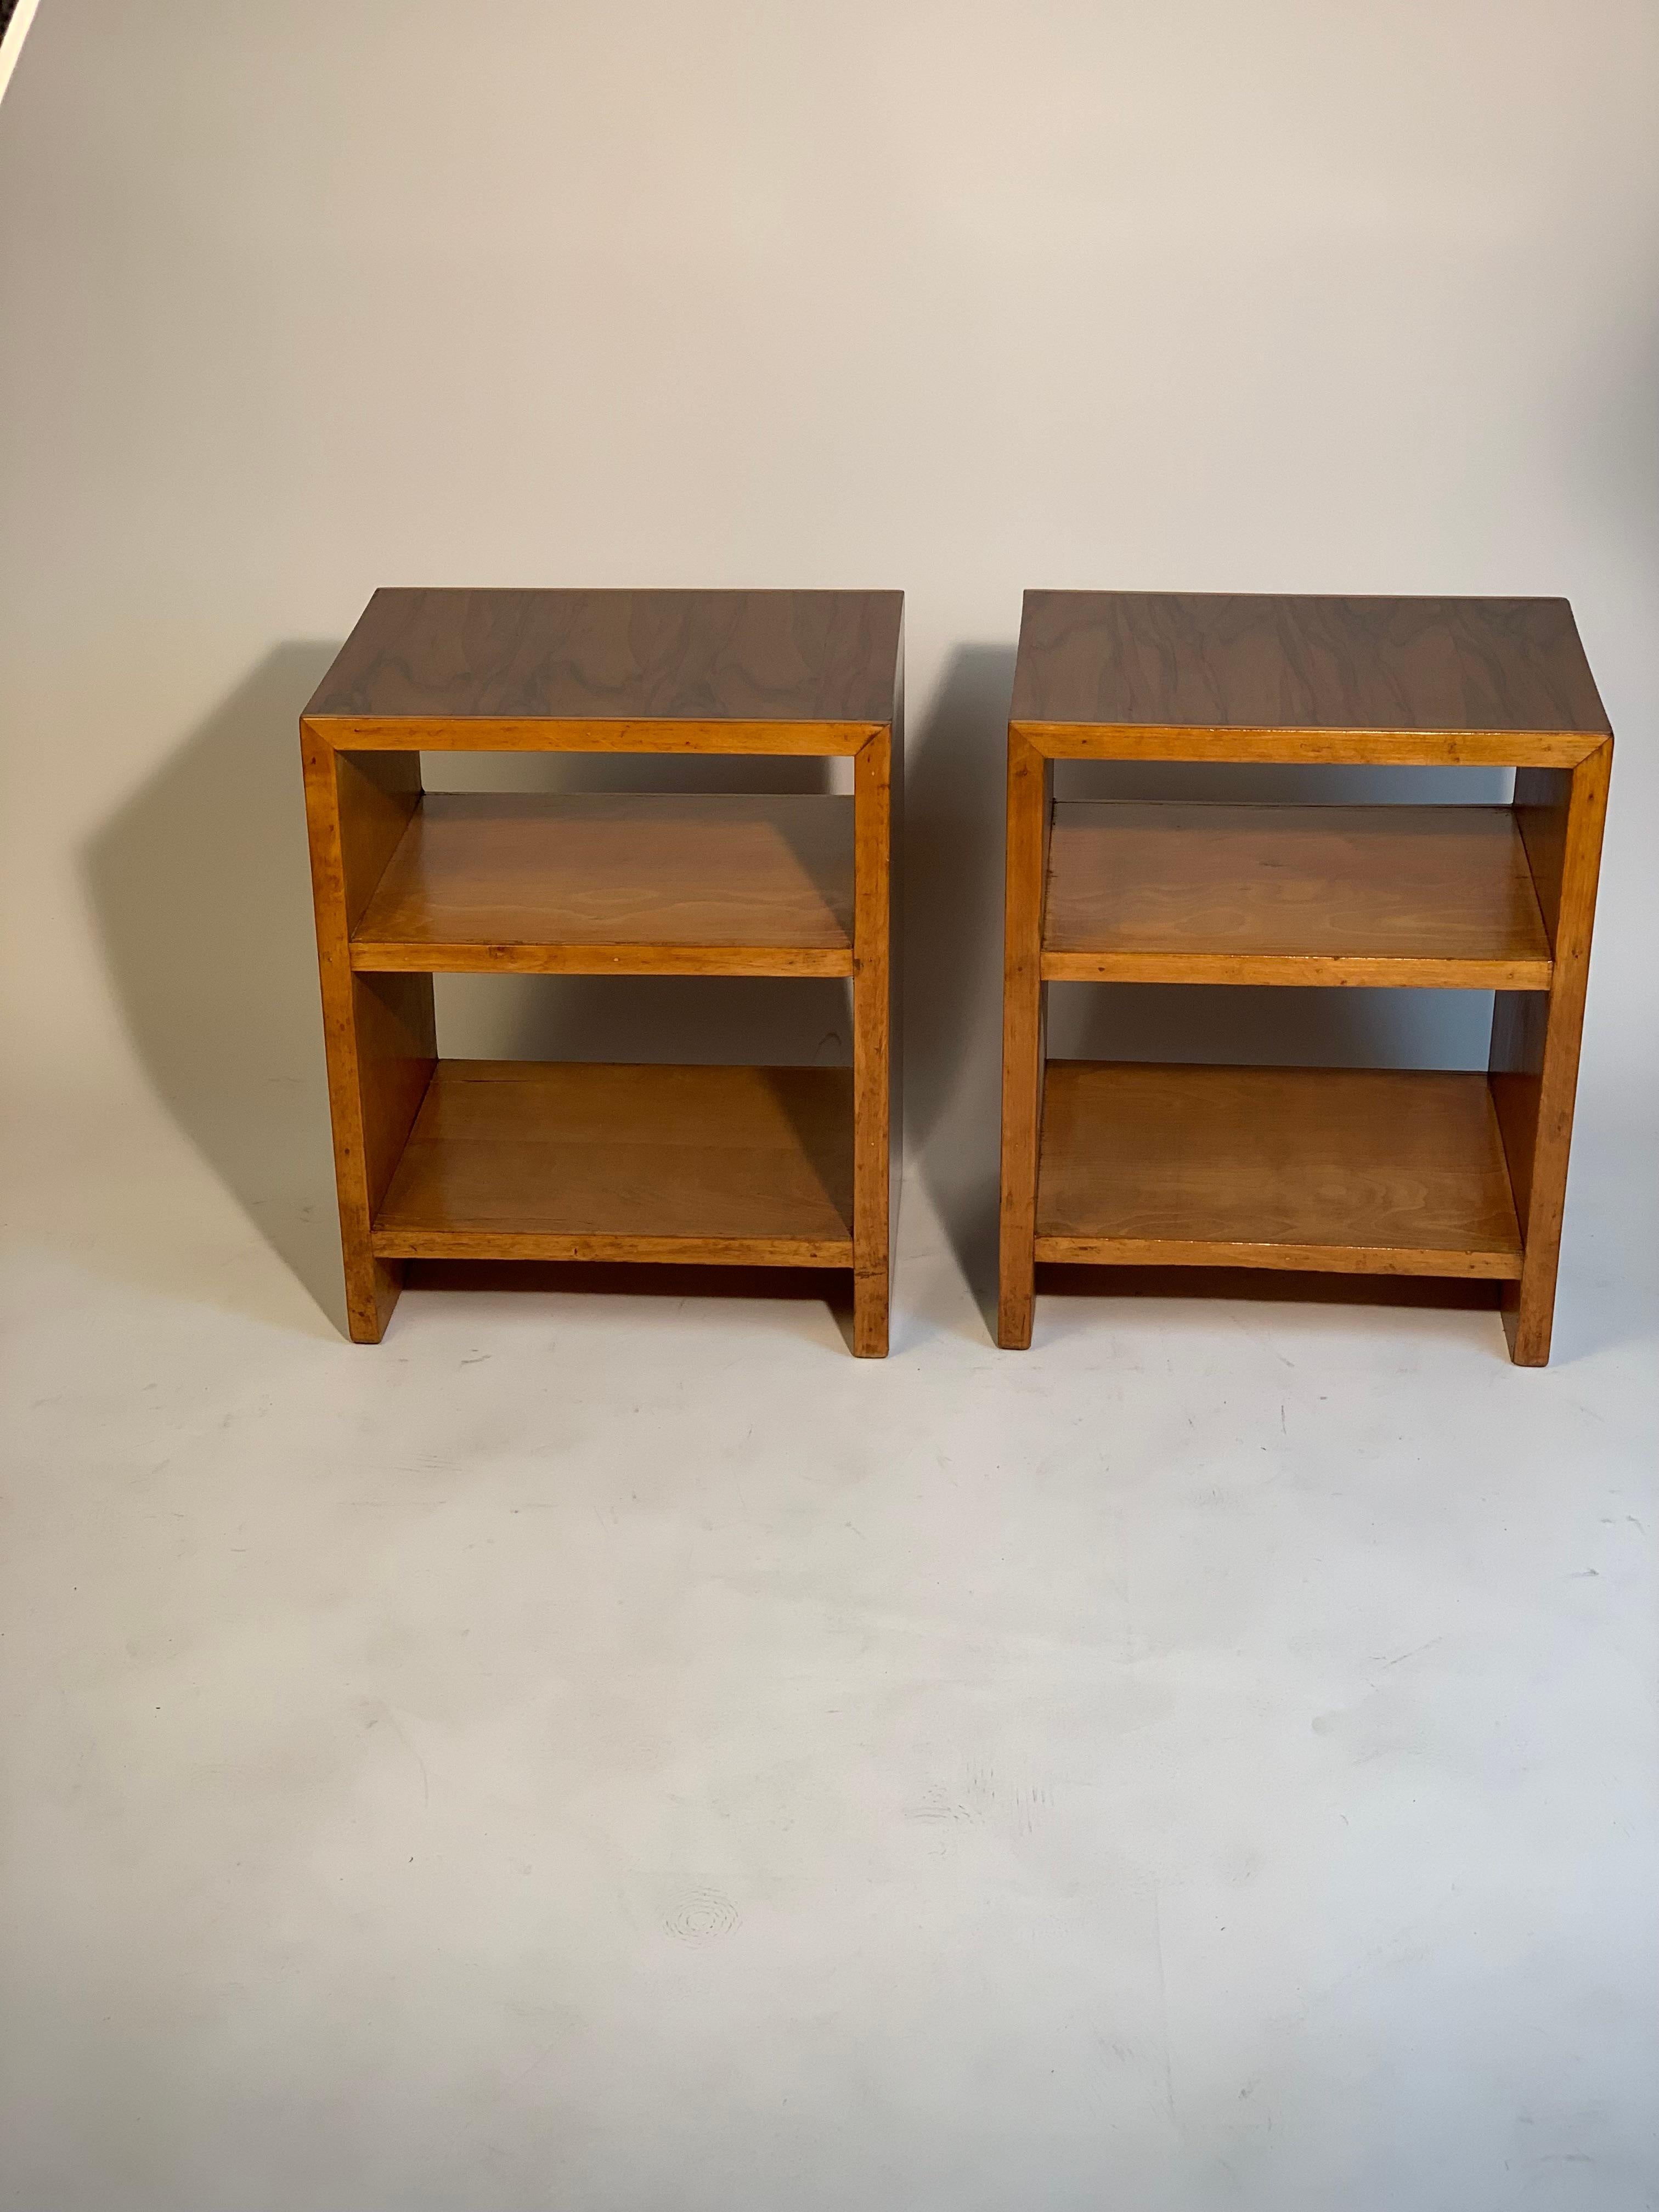 Wood Italian Art Deco Pair Of Double Shelve Side Table Or Bed Tables